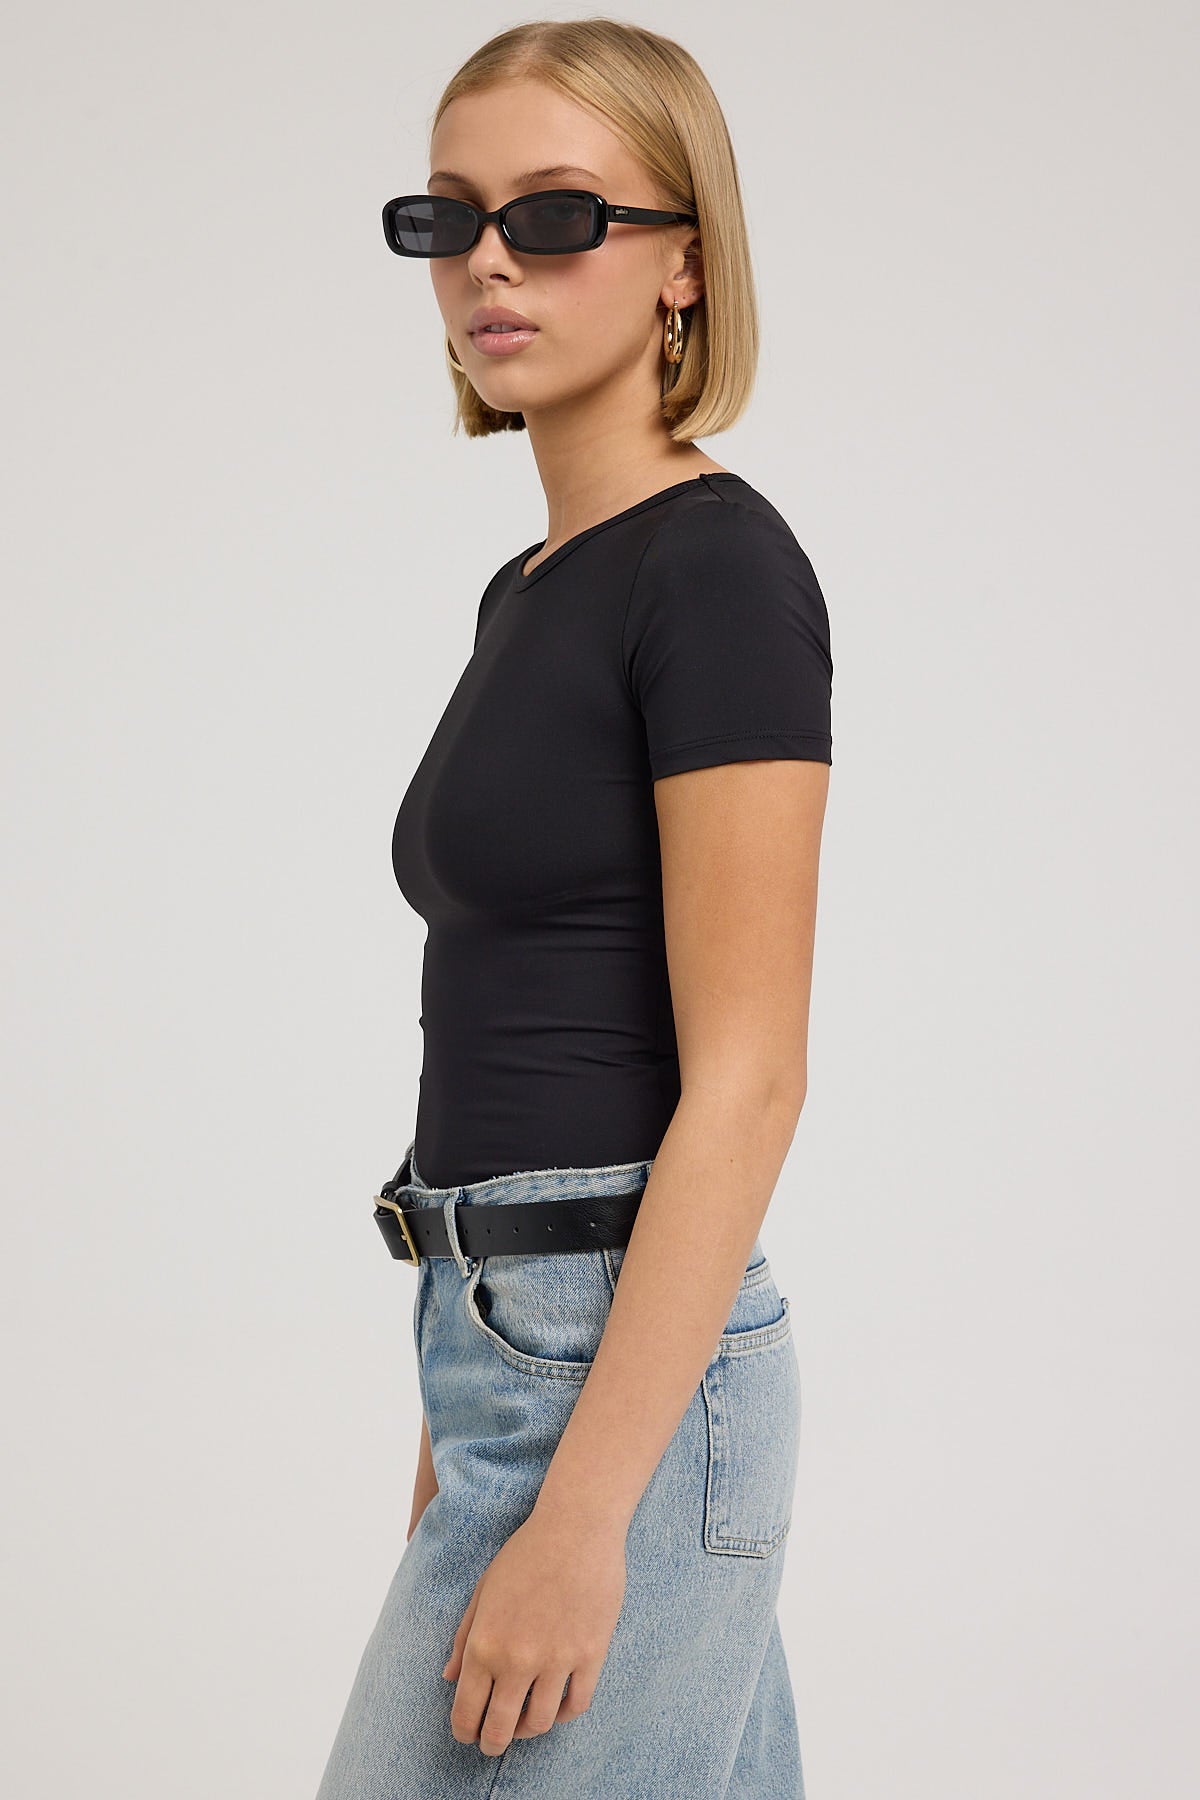 All About Eve Eve Staple Top Black